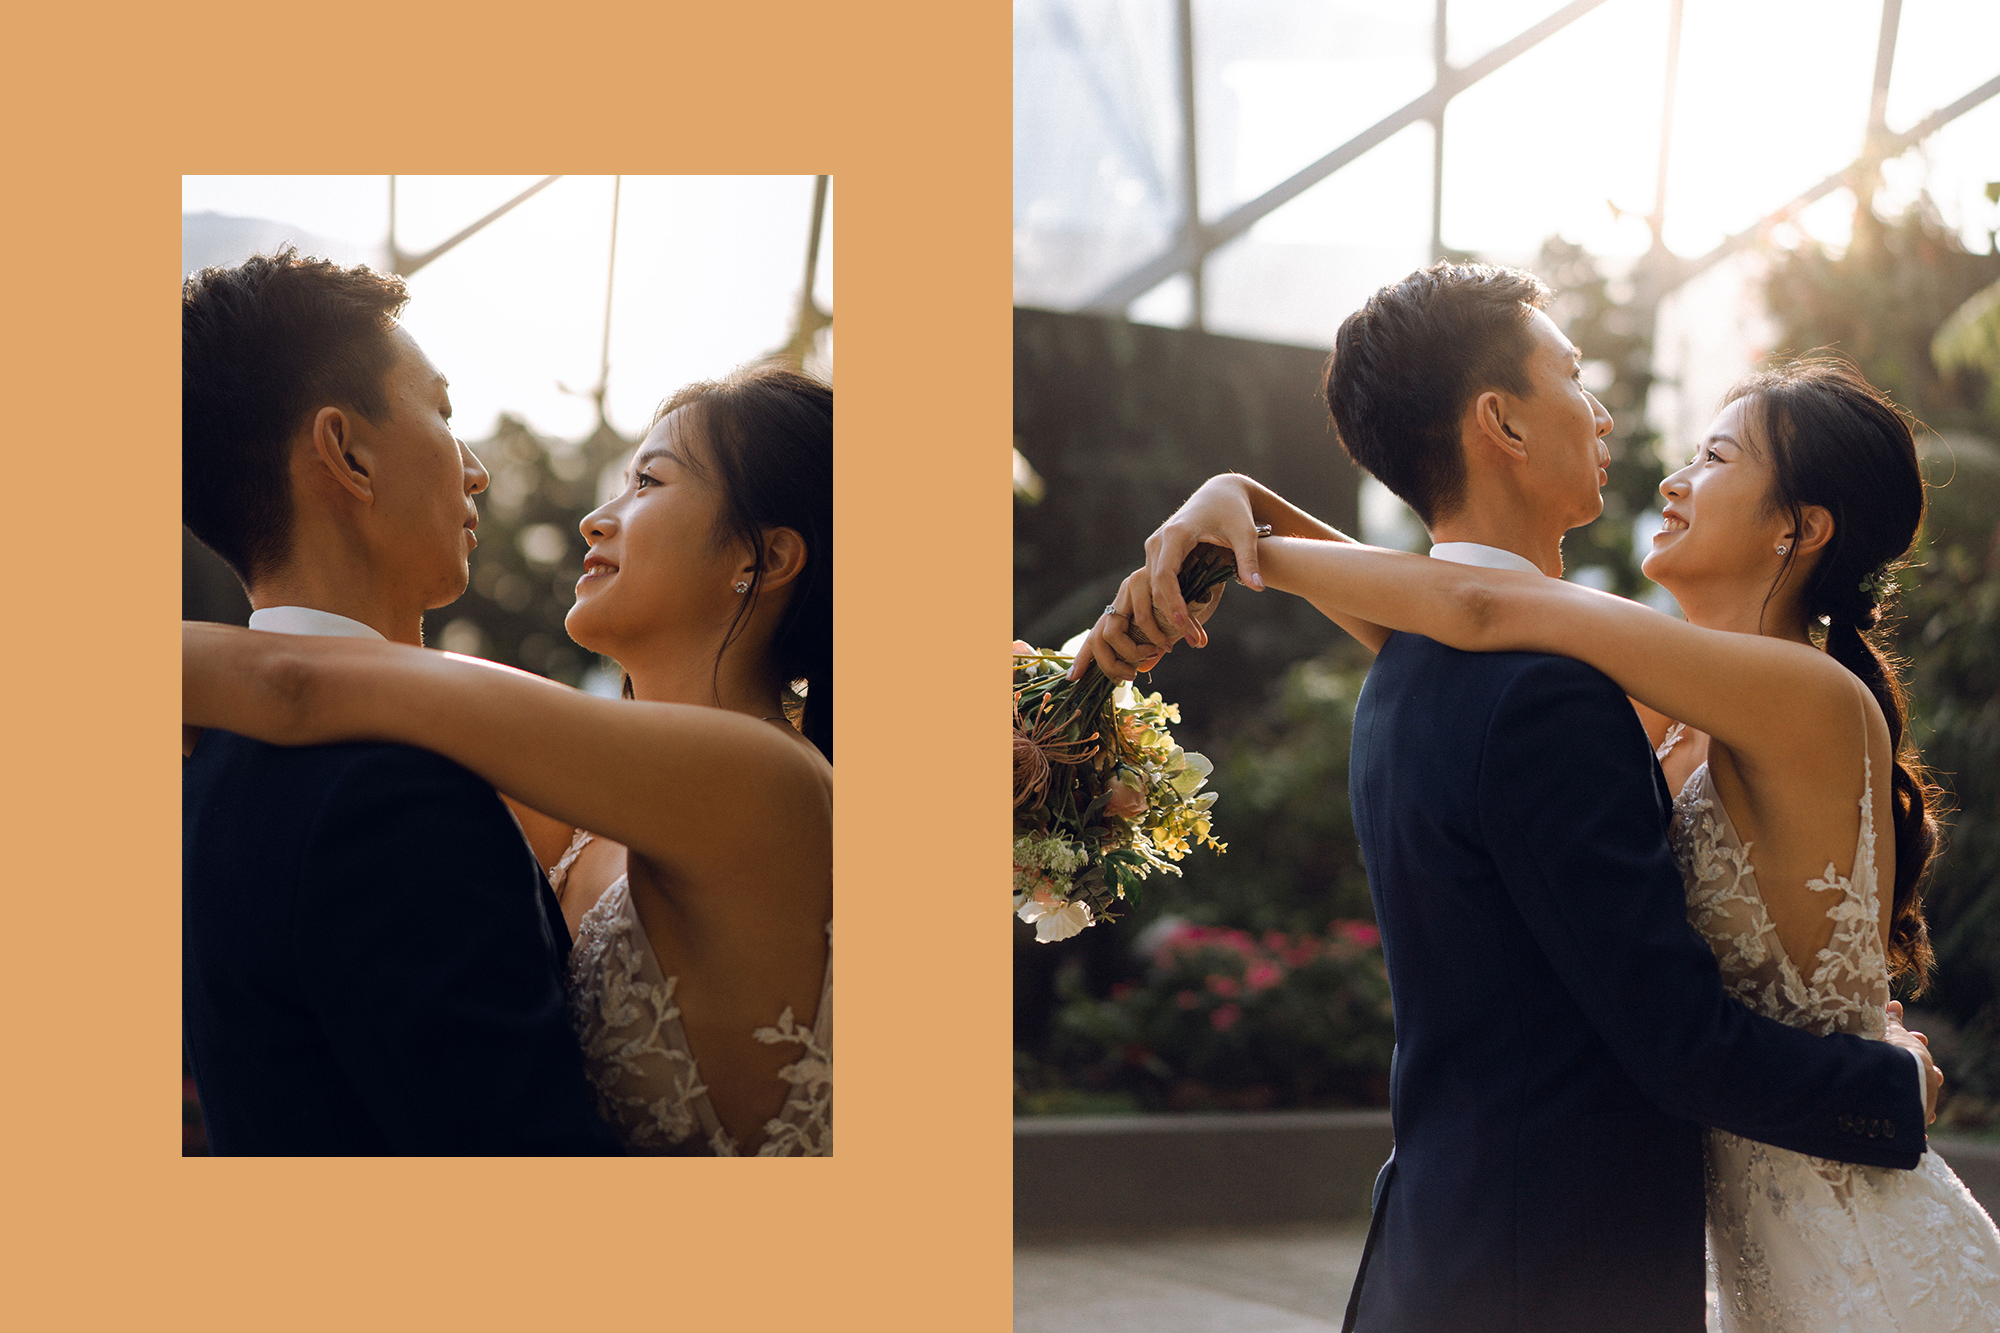 Sunset Prewedding Photoshoot At Cloud Forest, Gardens By The Bay  by Samantha on OneThreeOneFour 10